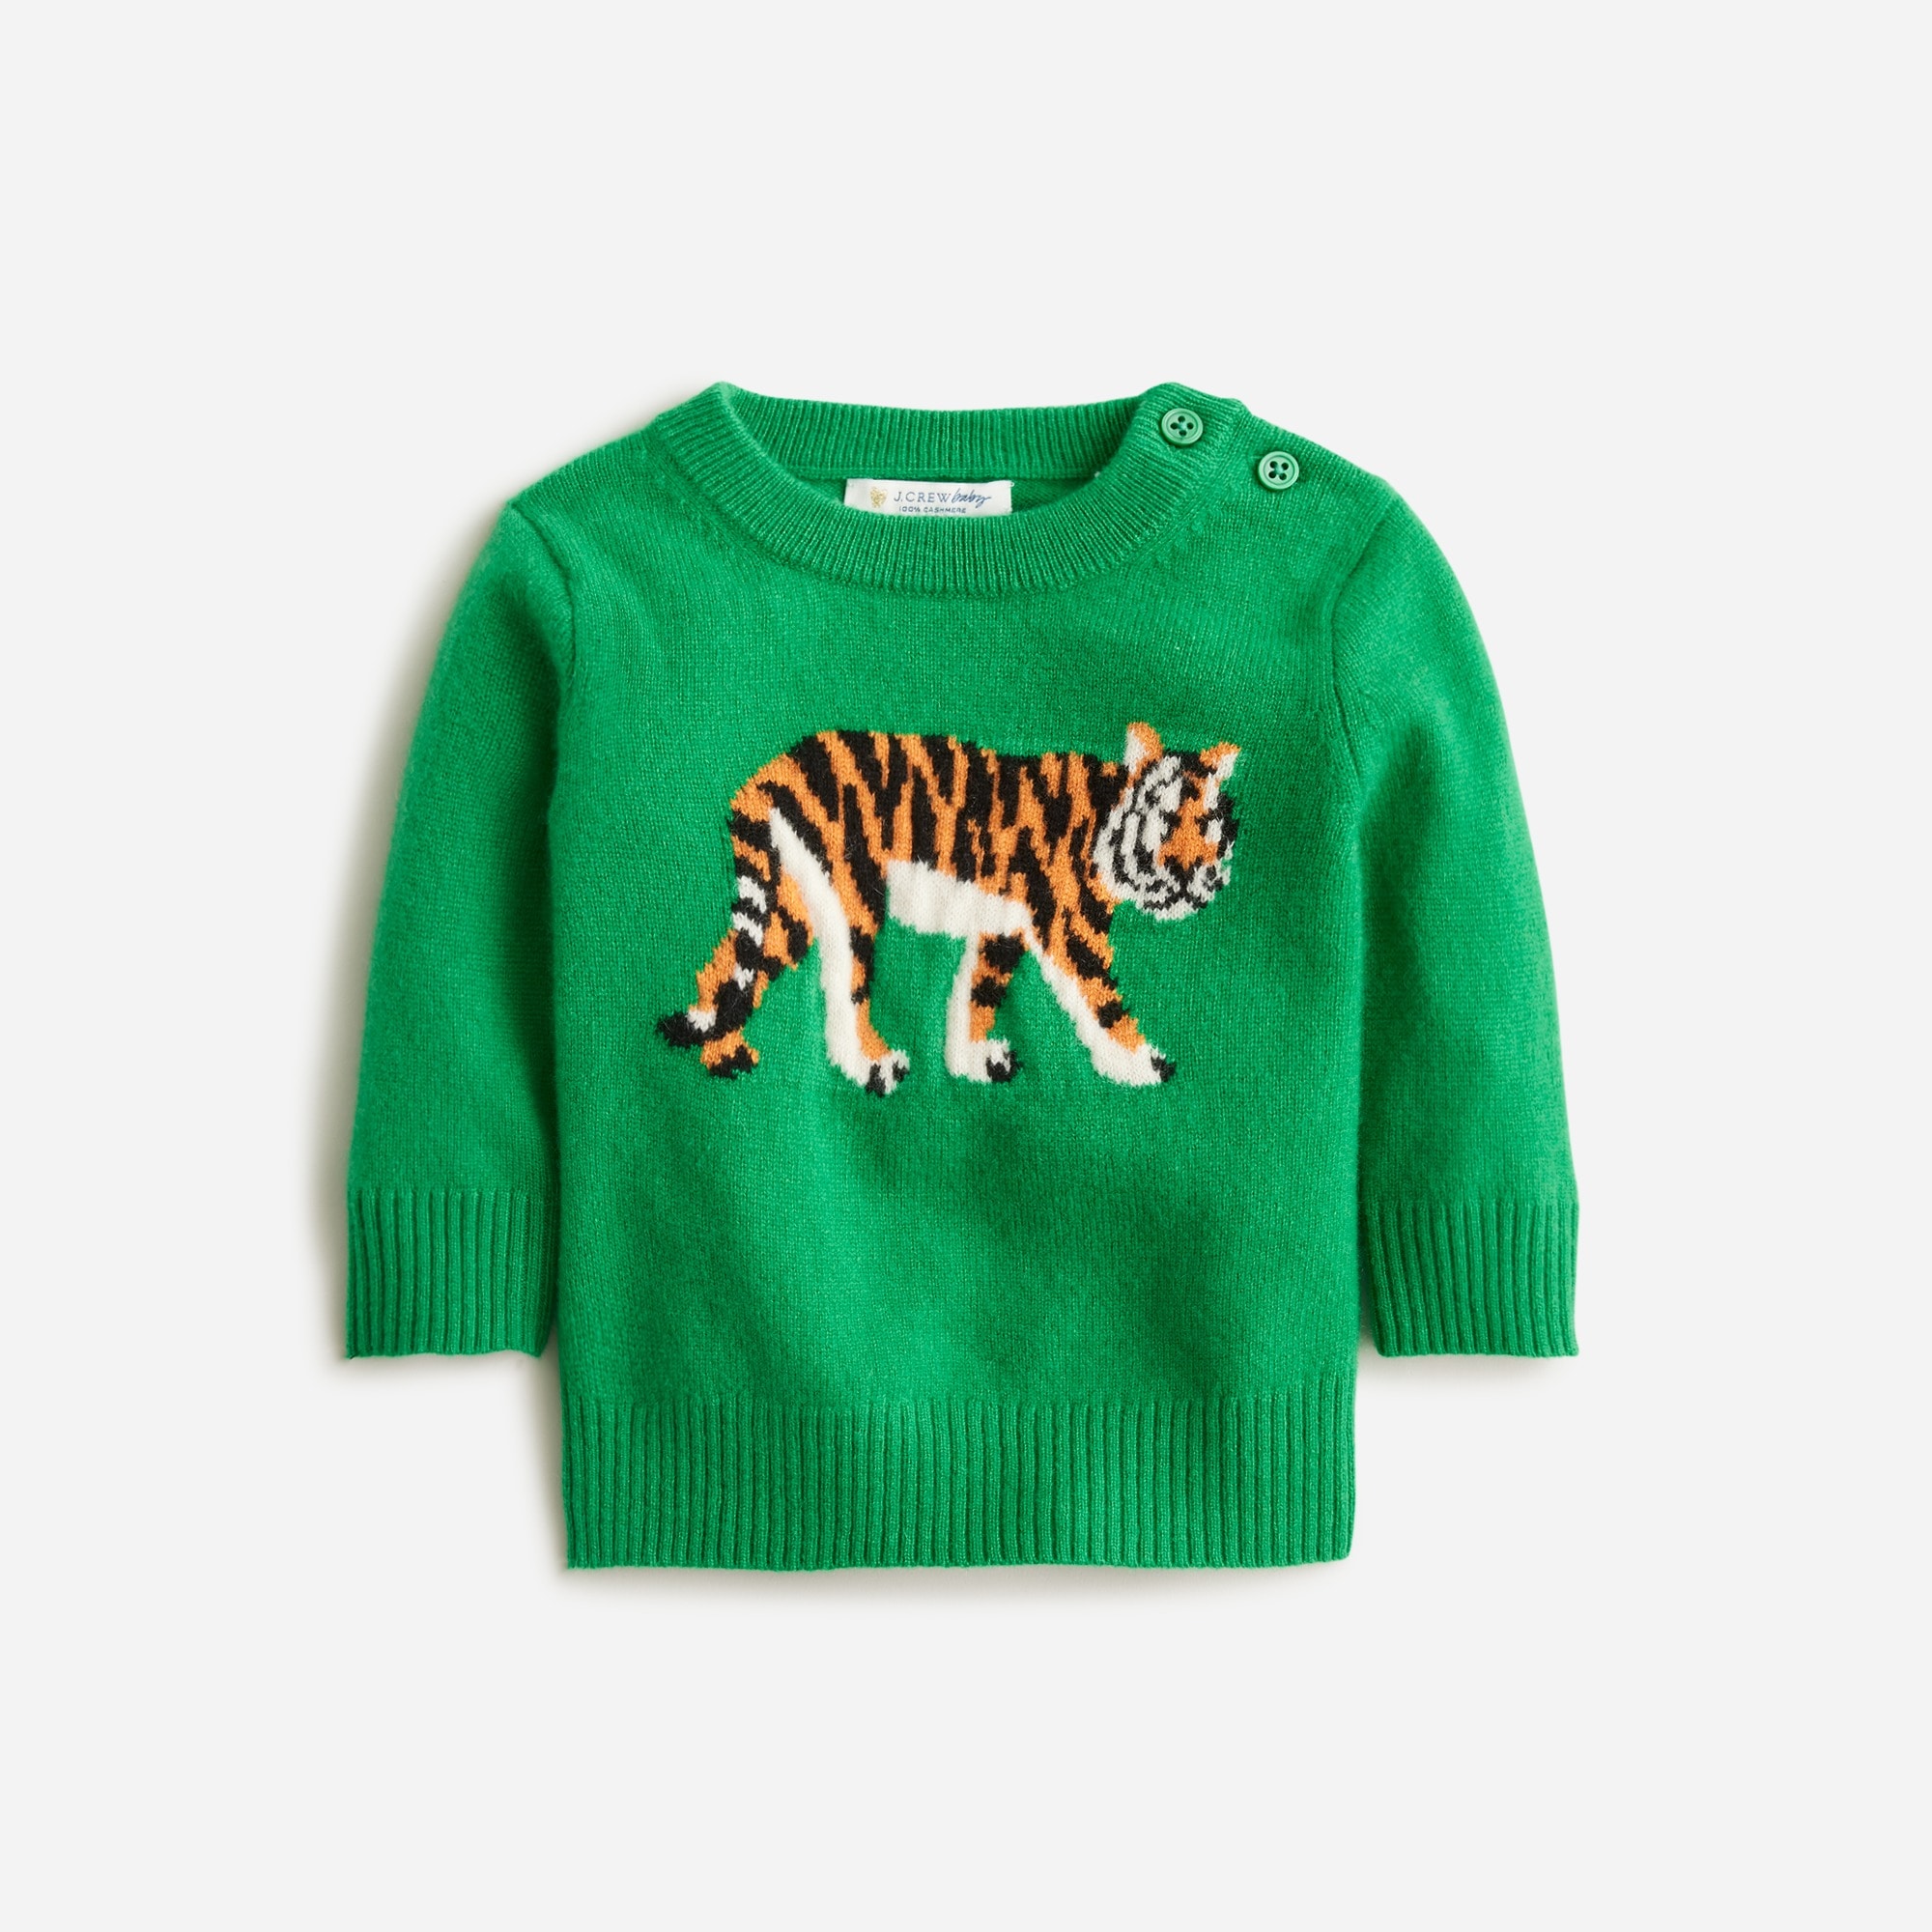 Jcrew Limited-edition baby cashmere crewneck sweater